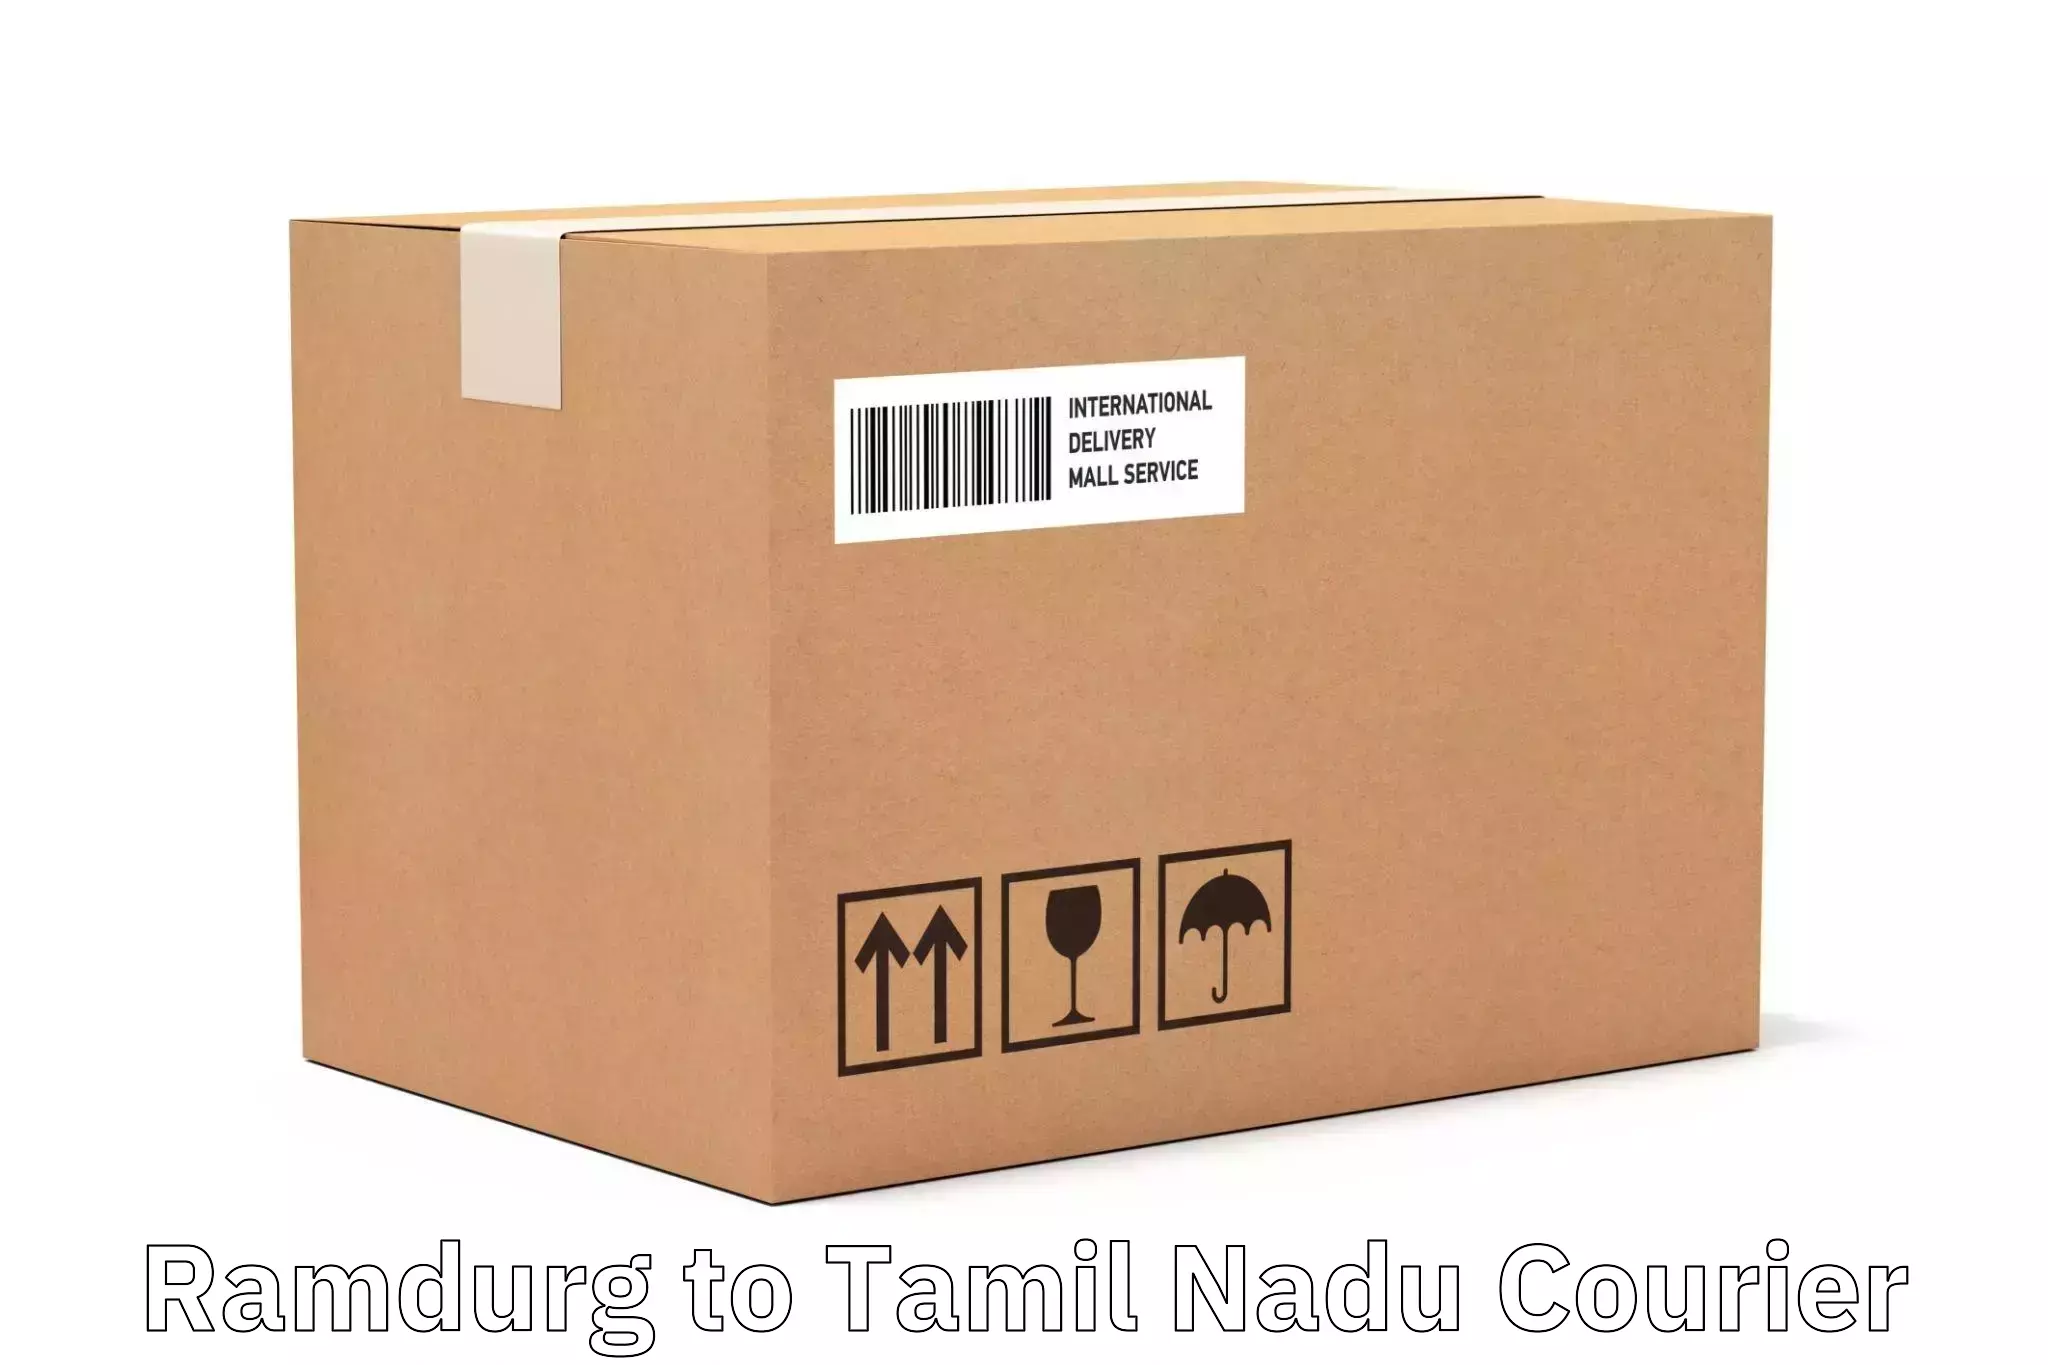 Postal and courier services in Ramdurg to Sriperumbudur